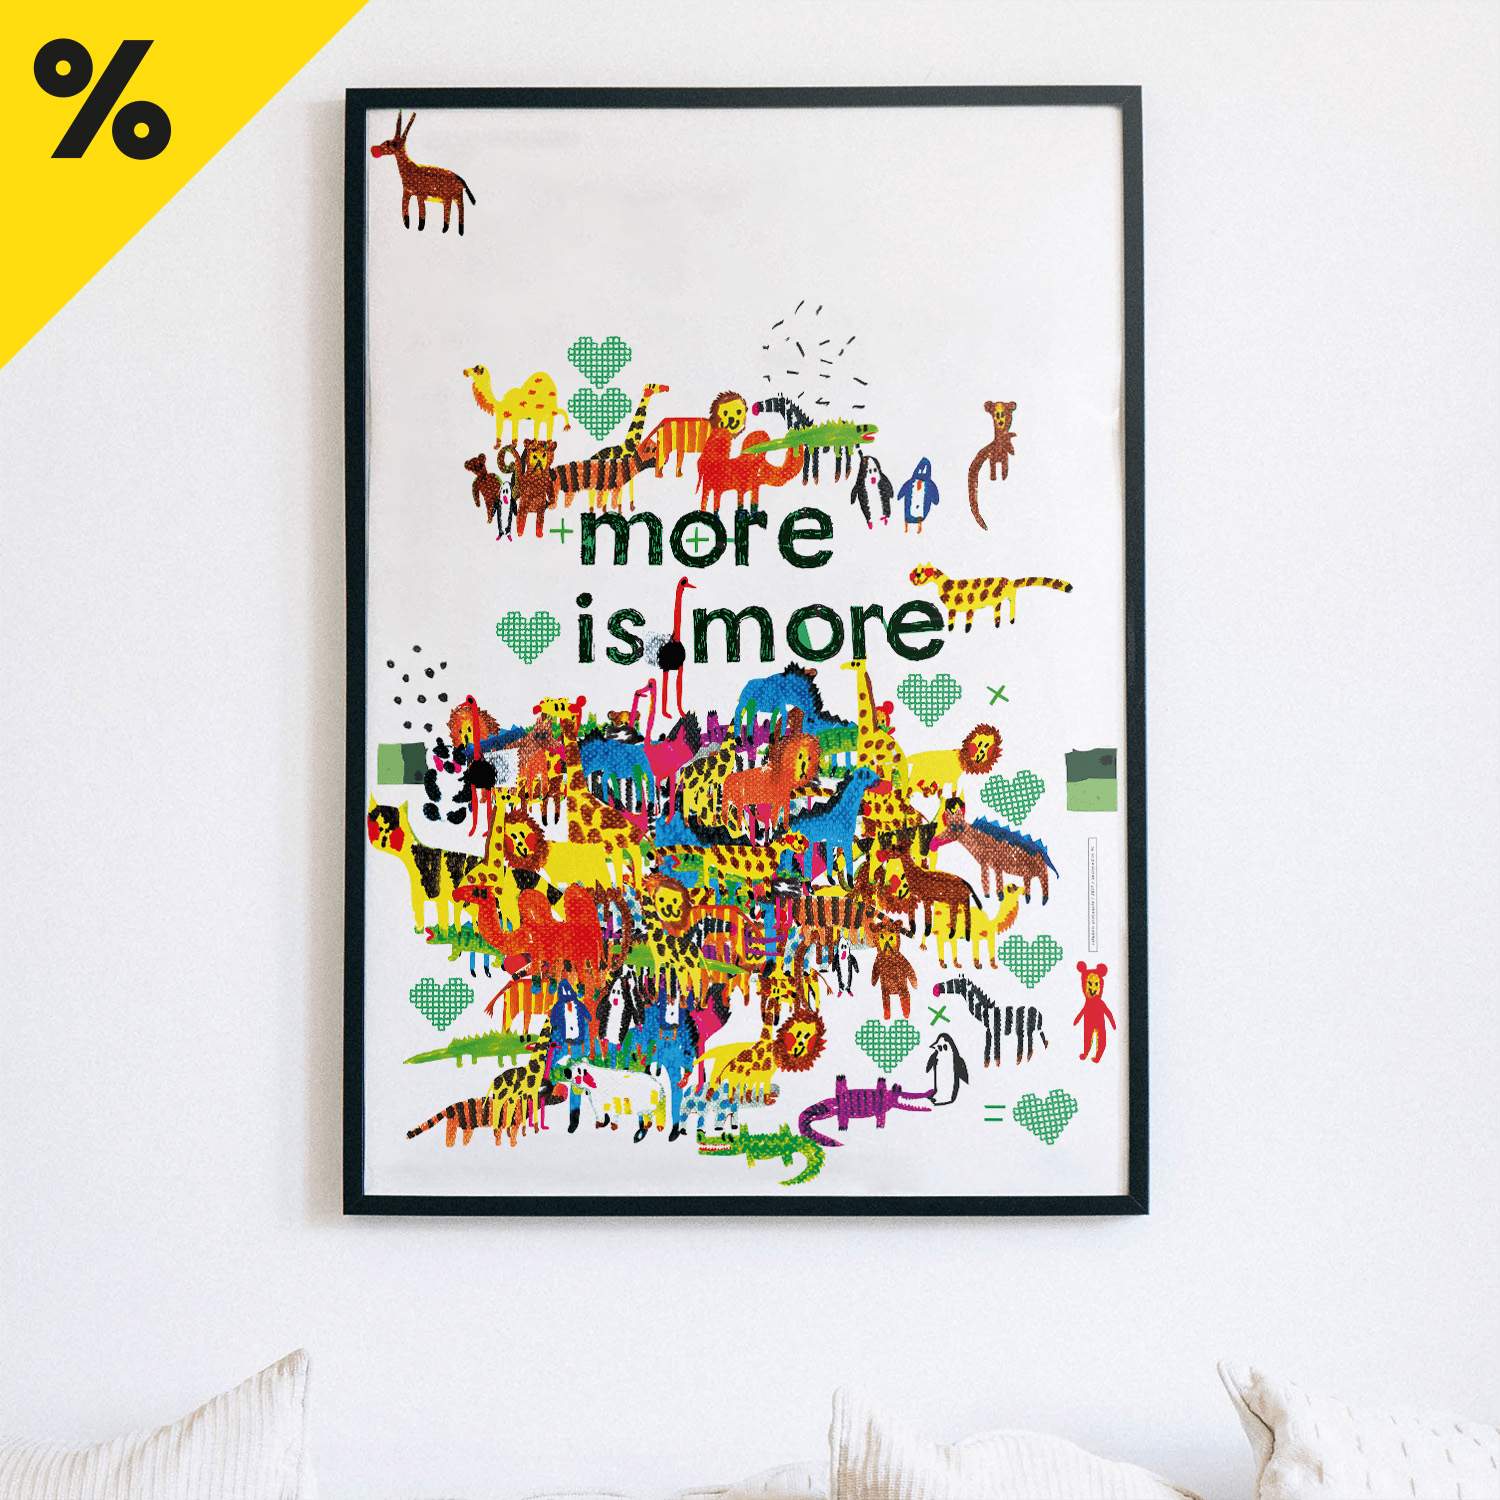 Plakat: "More is more"